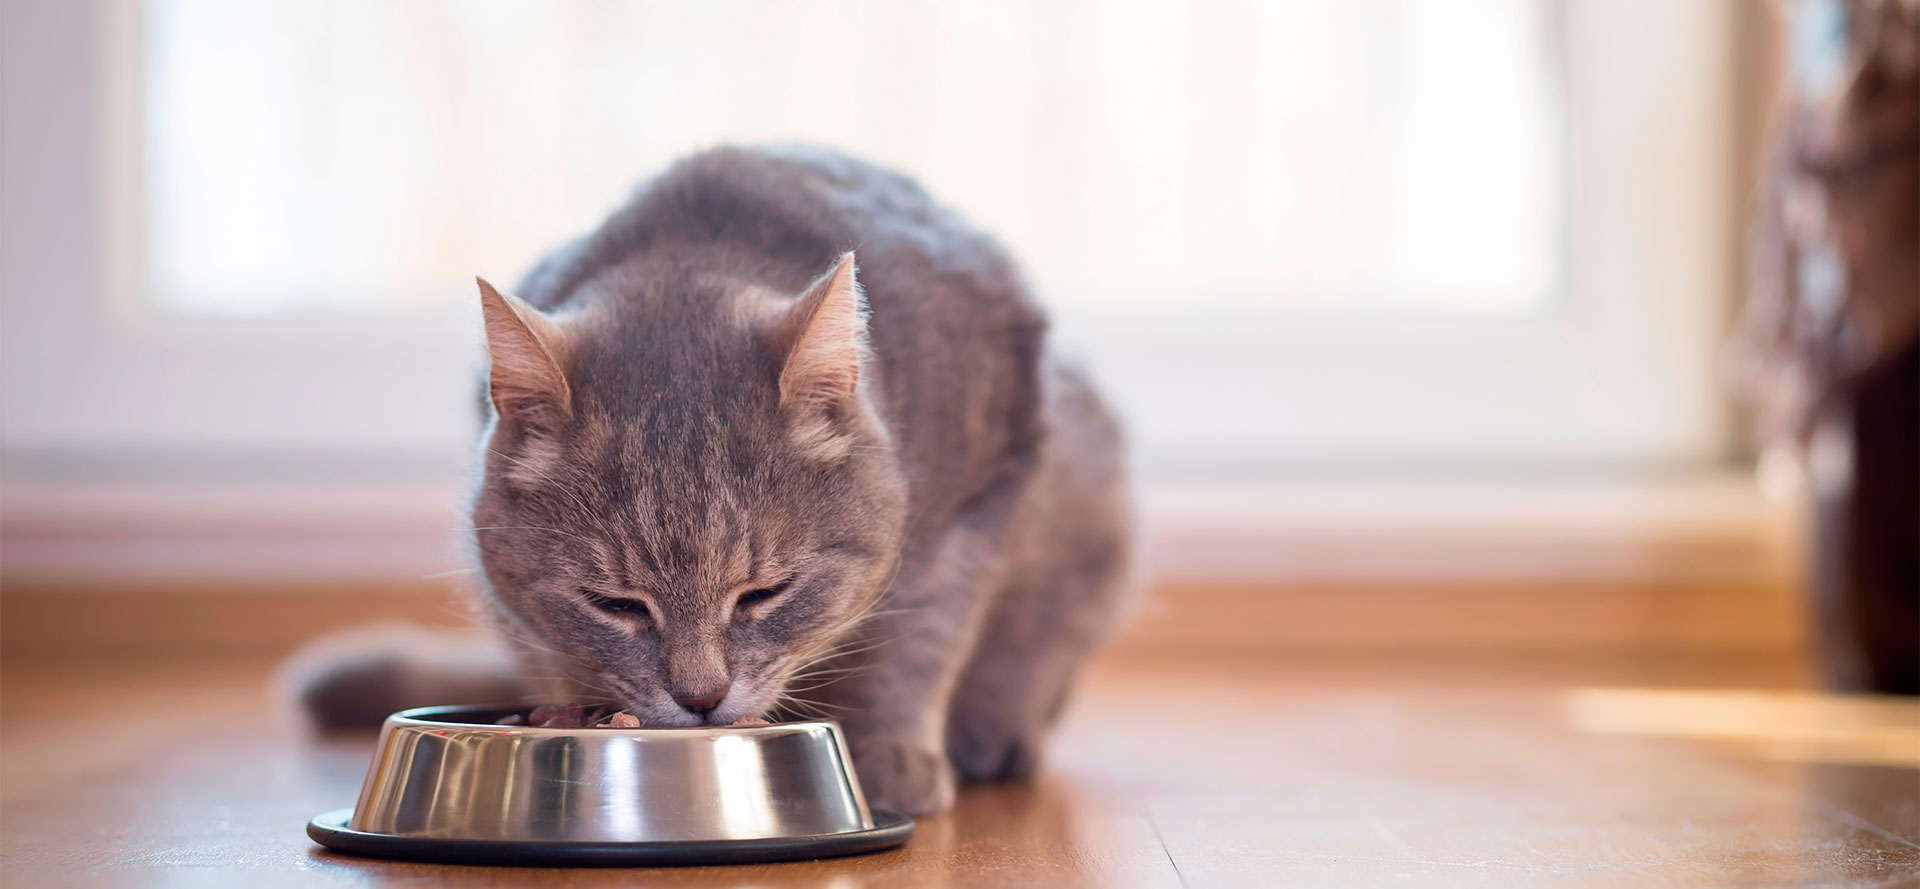 Gray cat eating dry cat food from a bowl.